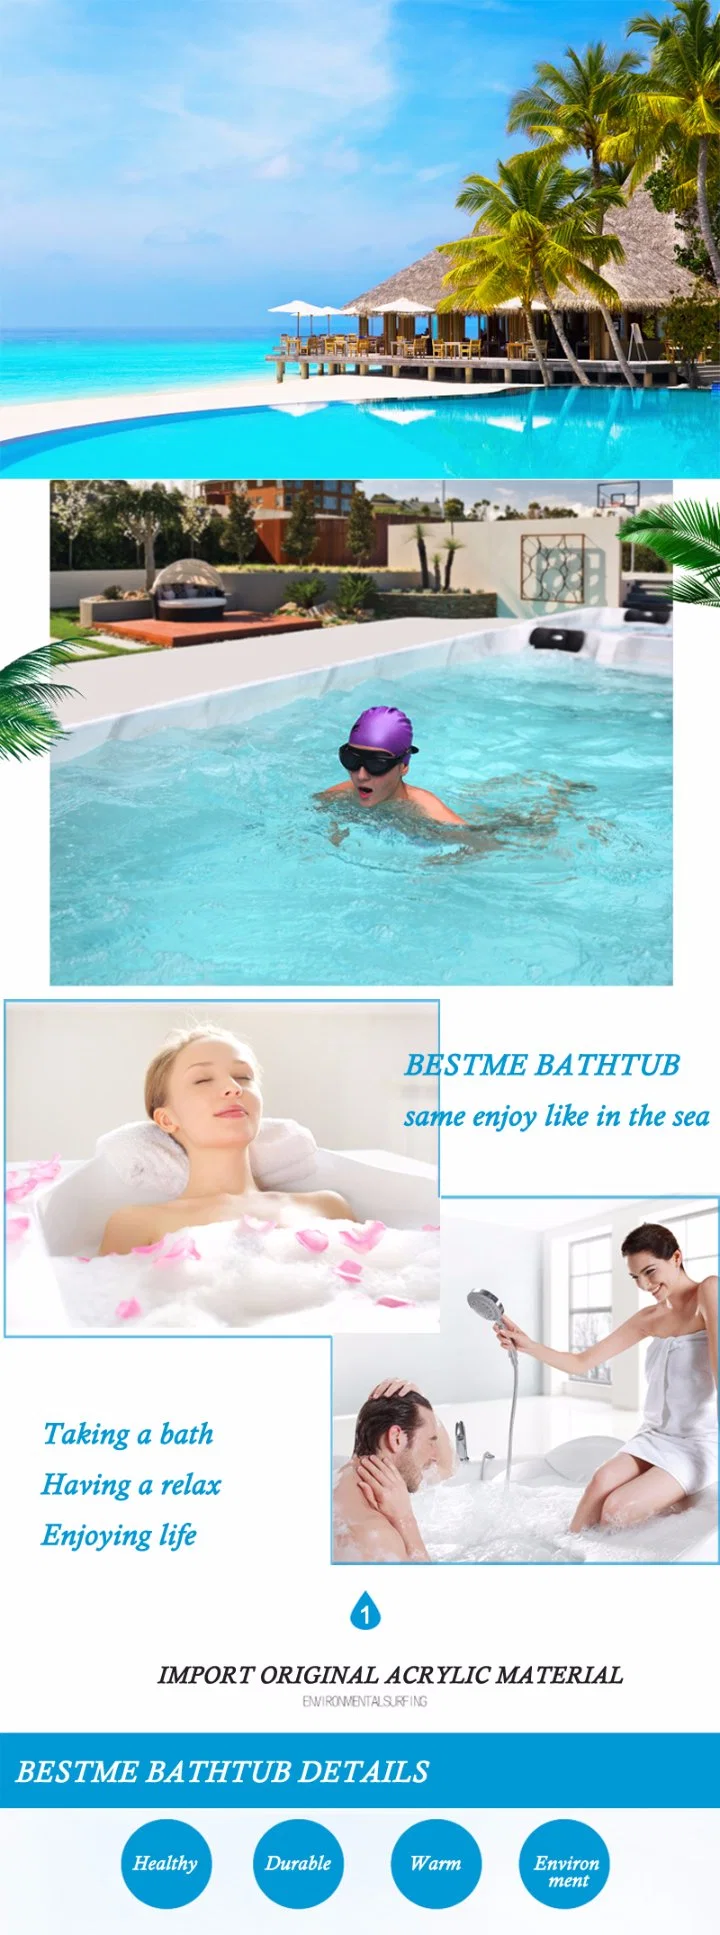 Hot Sales Triangle Acrylict Bathroom Jacuzzi Massage Bathtub for Two-Persons Jacuzzi (Bt-A1030)